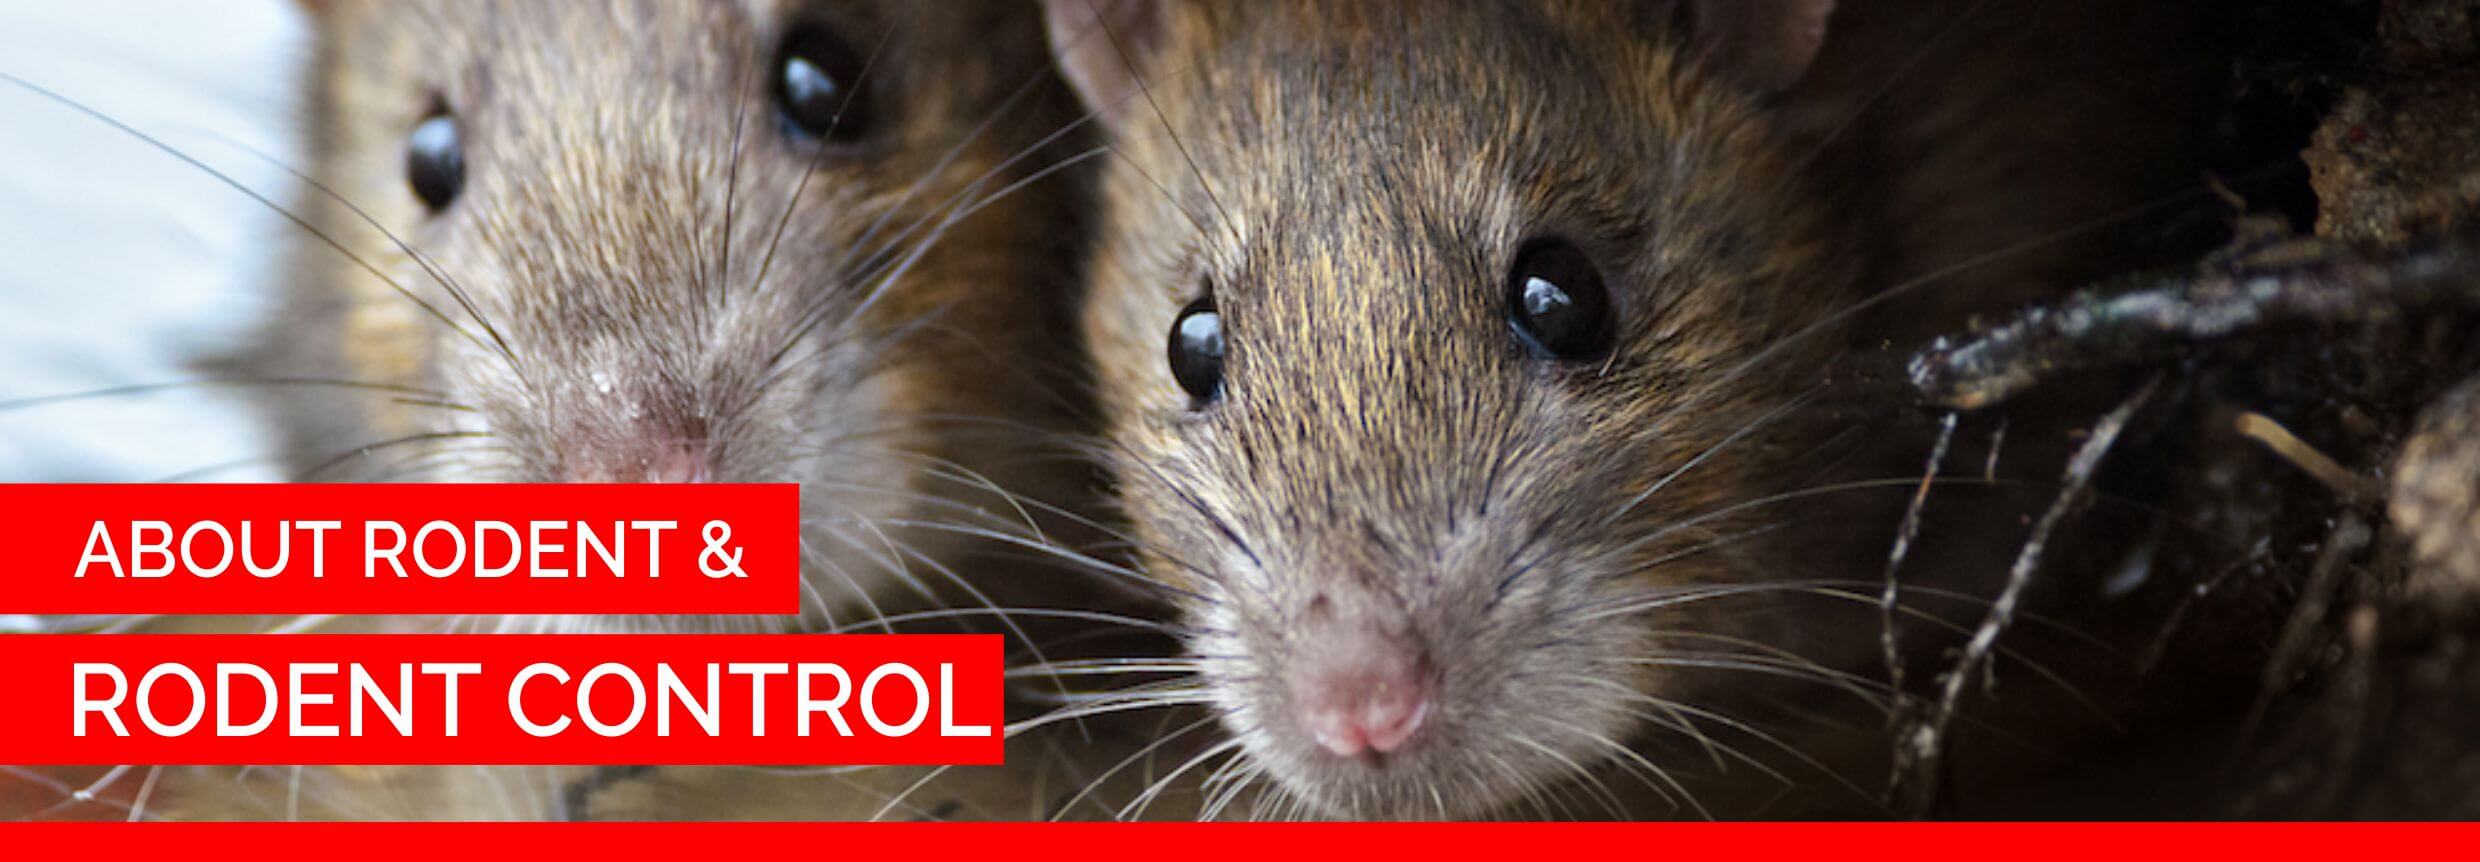 about rodent and rodent control